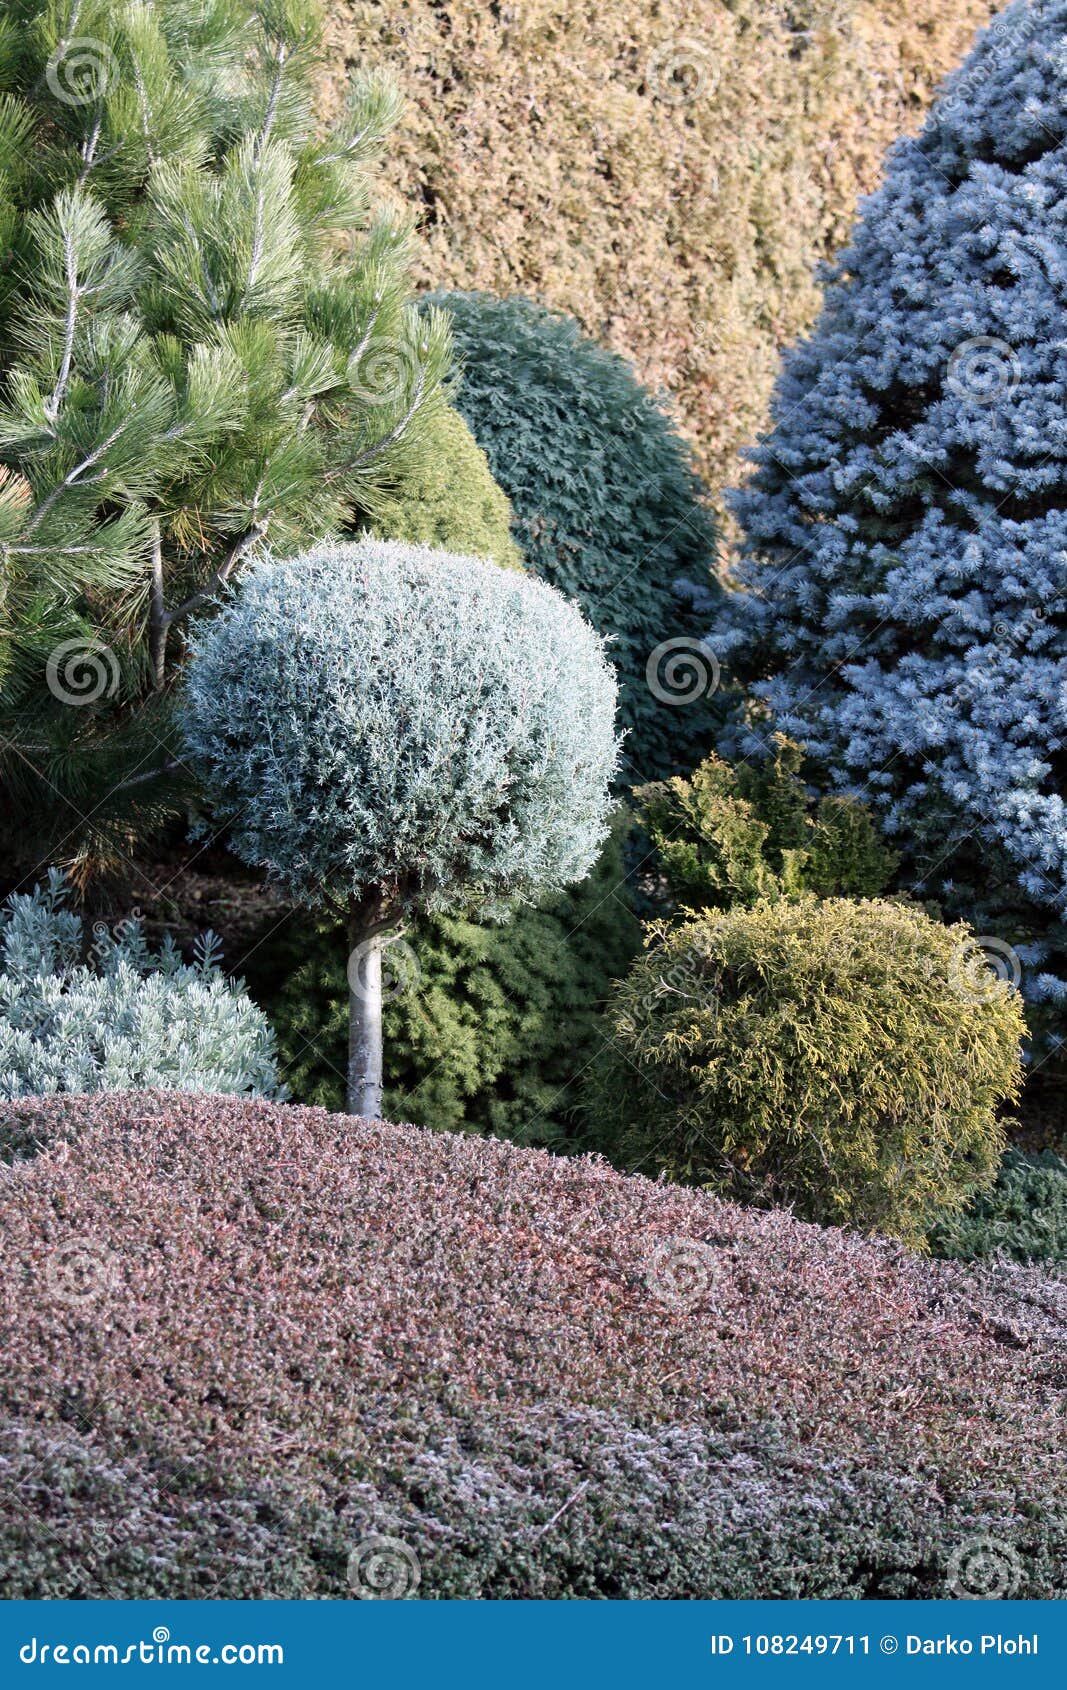 garden borders with conifers and cover plants